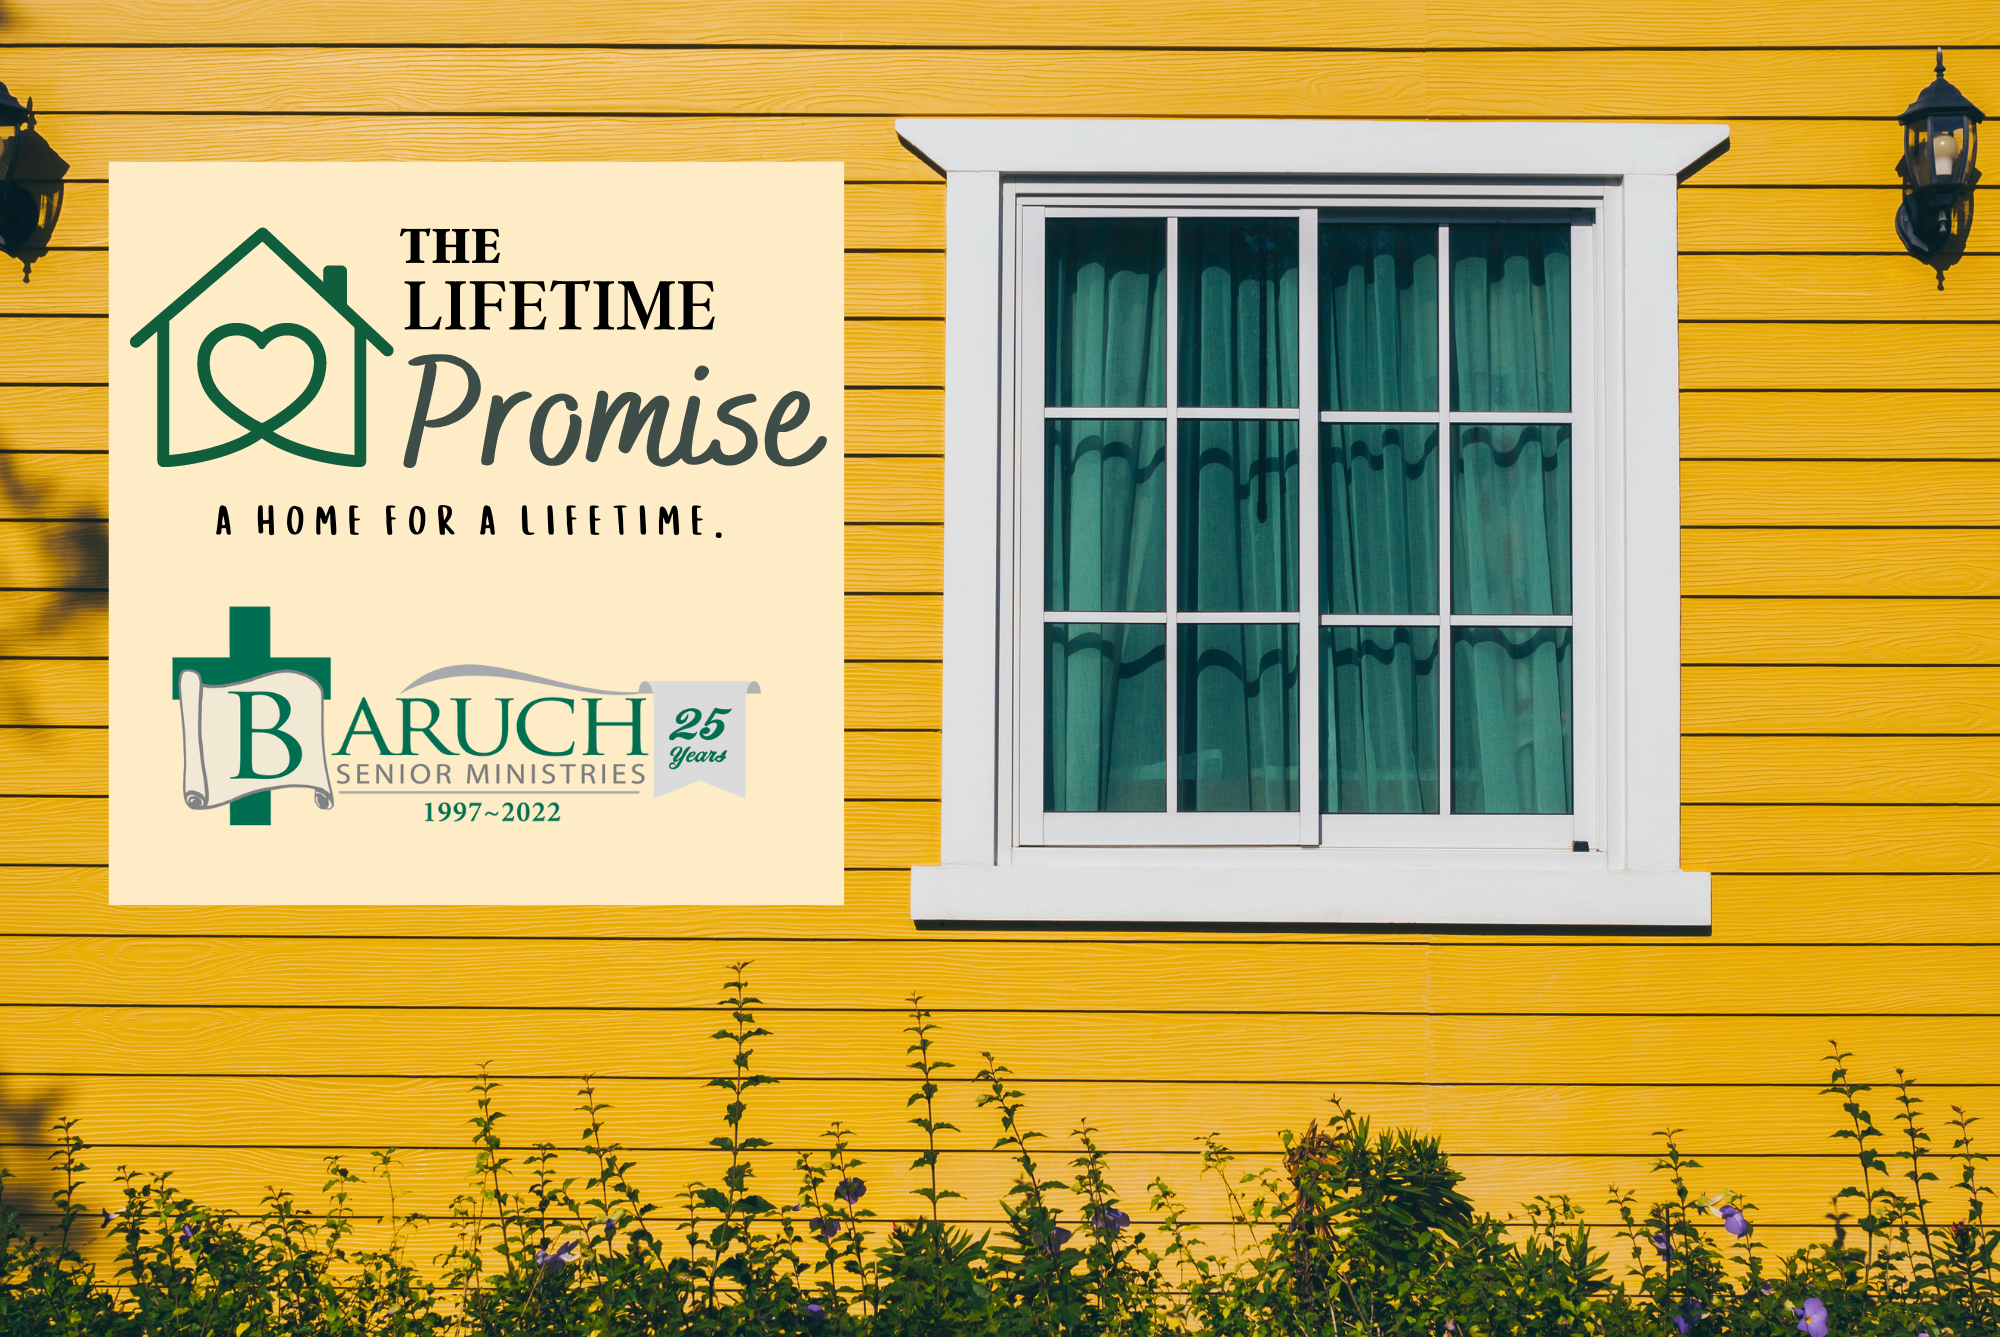 Learn More About The Lifetime Promise